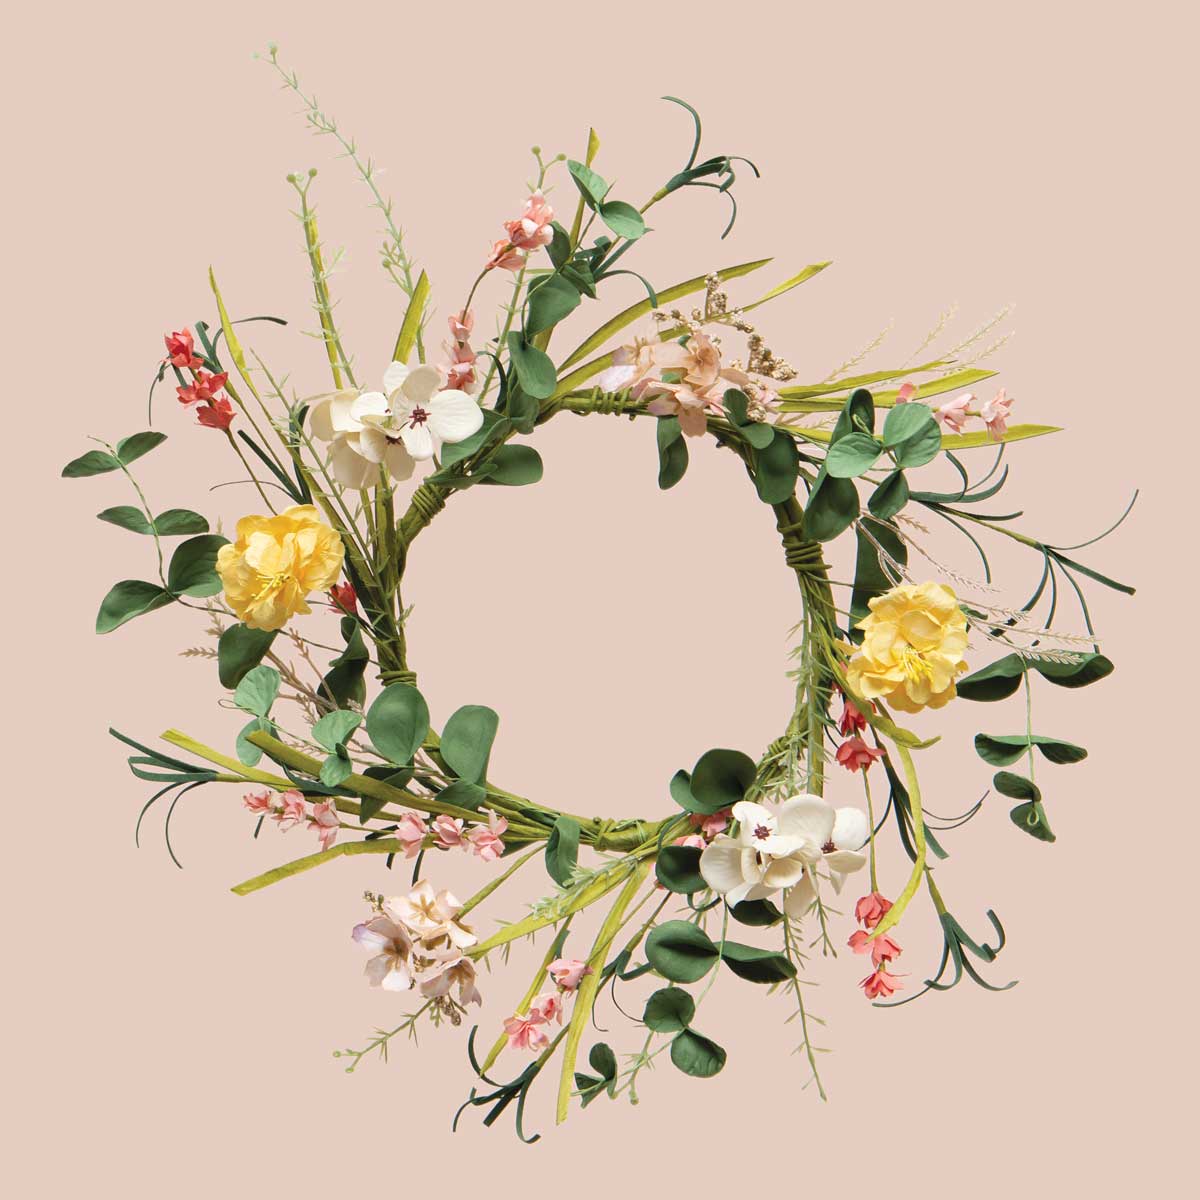 b50 MINI WREATH WHIMSEY FLORAL 17IN (INNER RING 6.5IN) - Click Image to Close